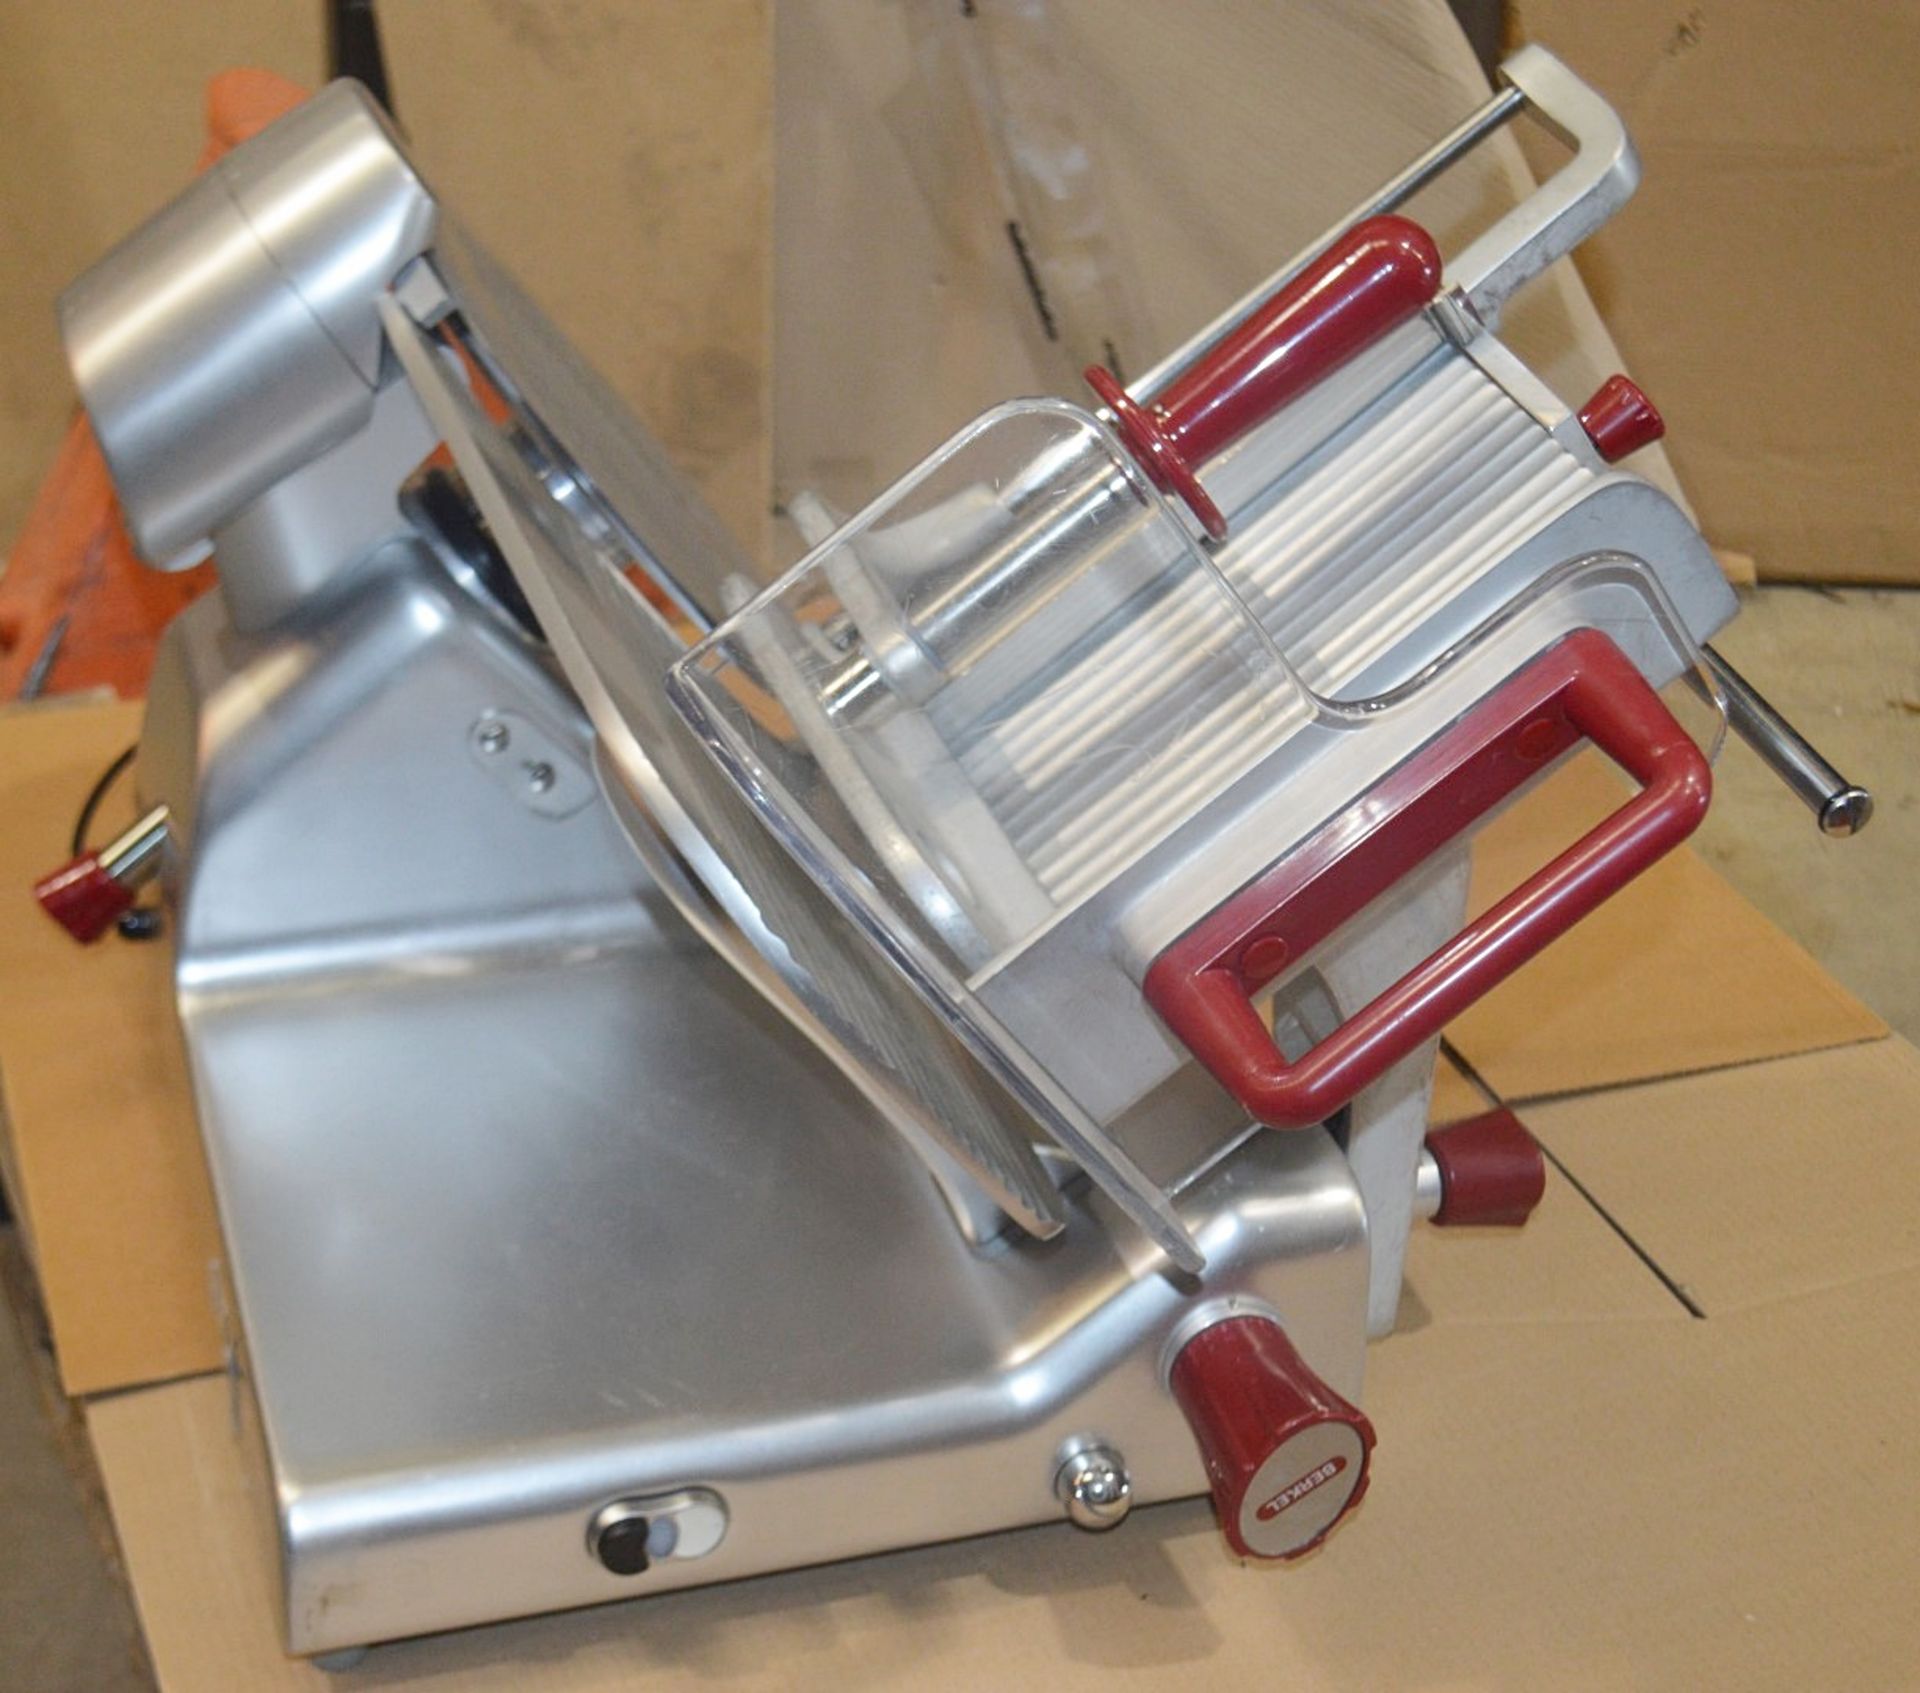 1 x AVERY BERKEL Commercial Meat Slicer In Stainless Steel - Dimensions: H54 x W52 x D42cm - Very - Image 7 of 10